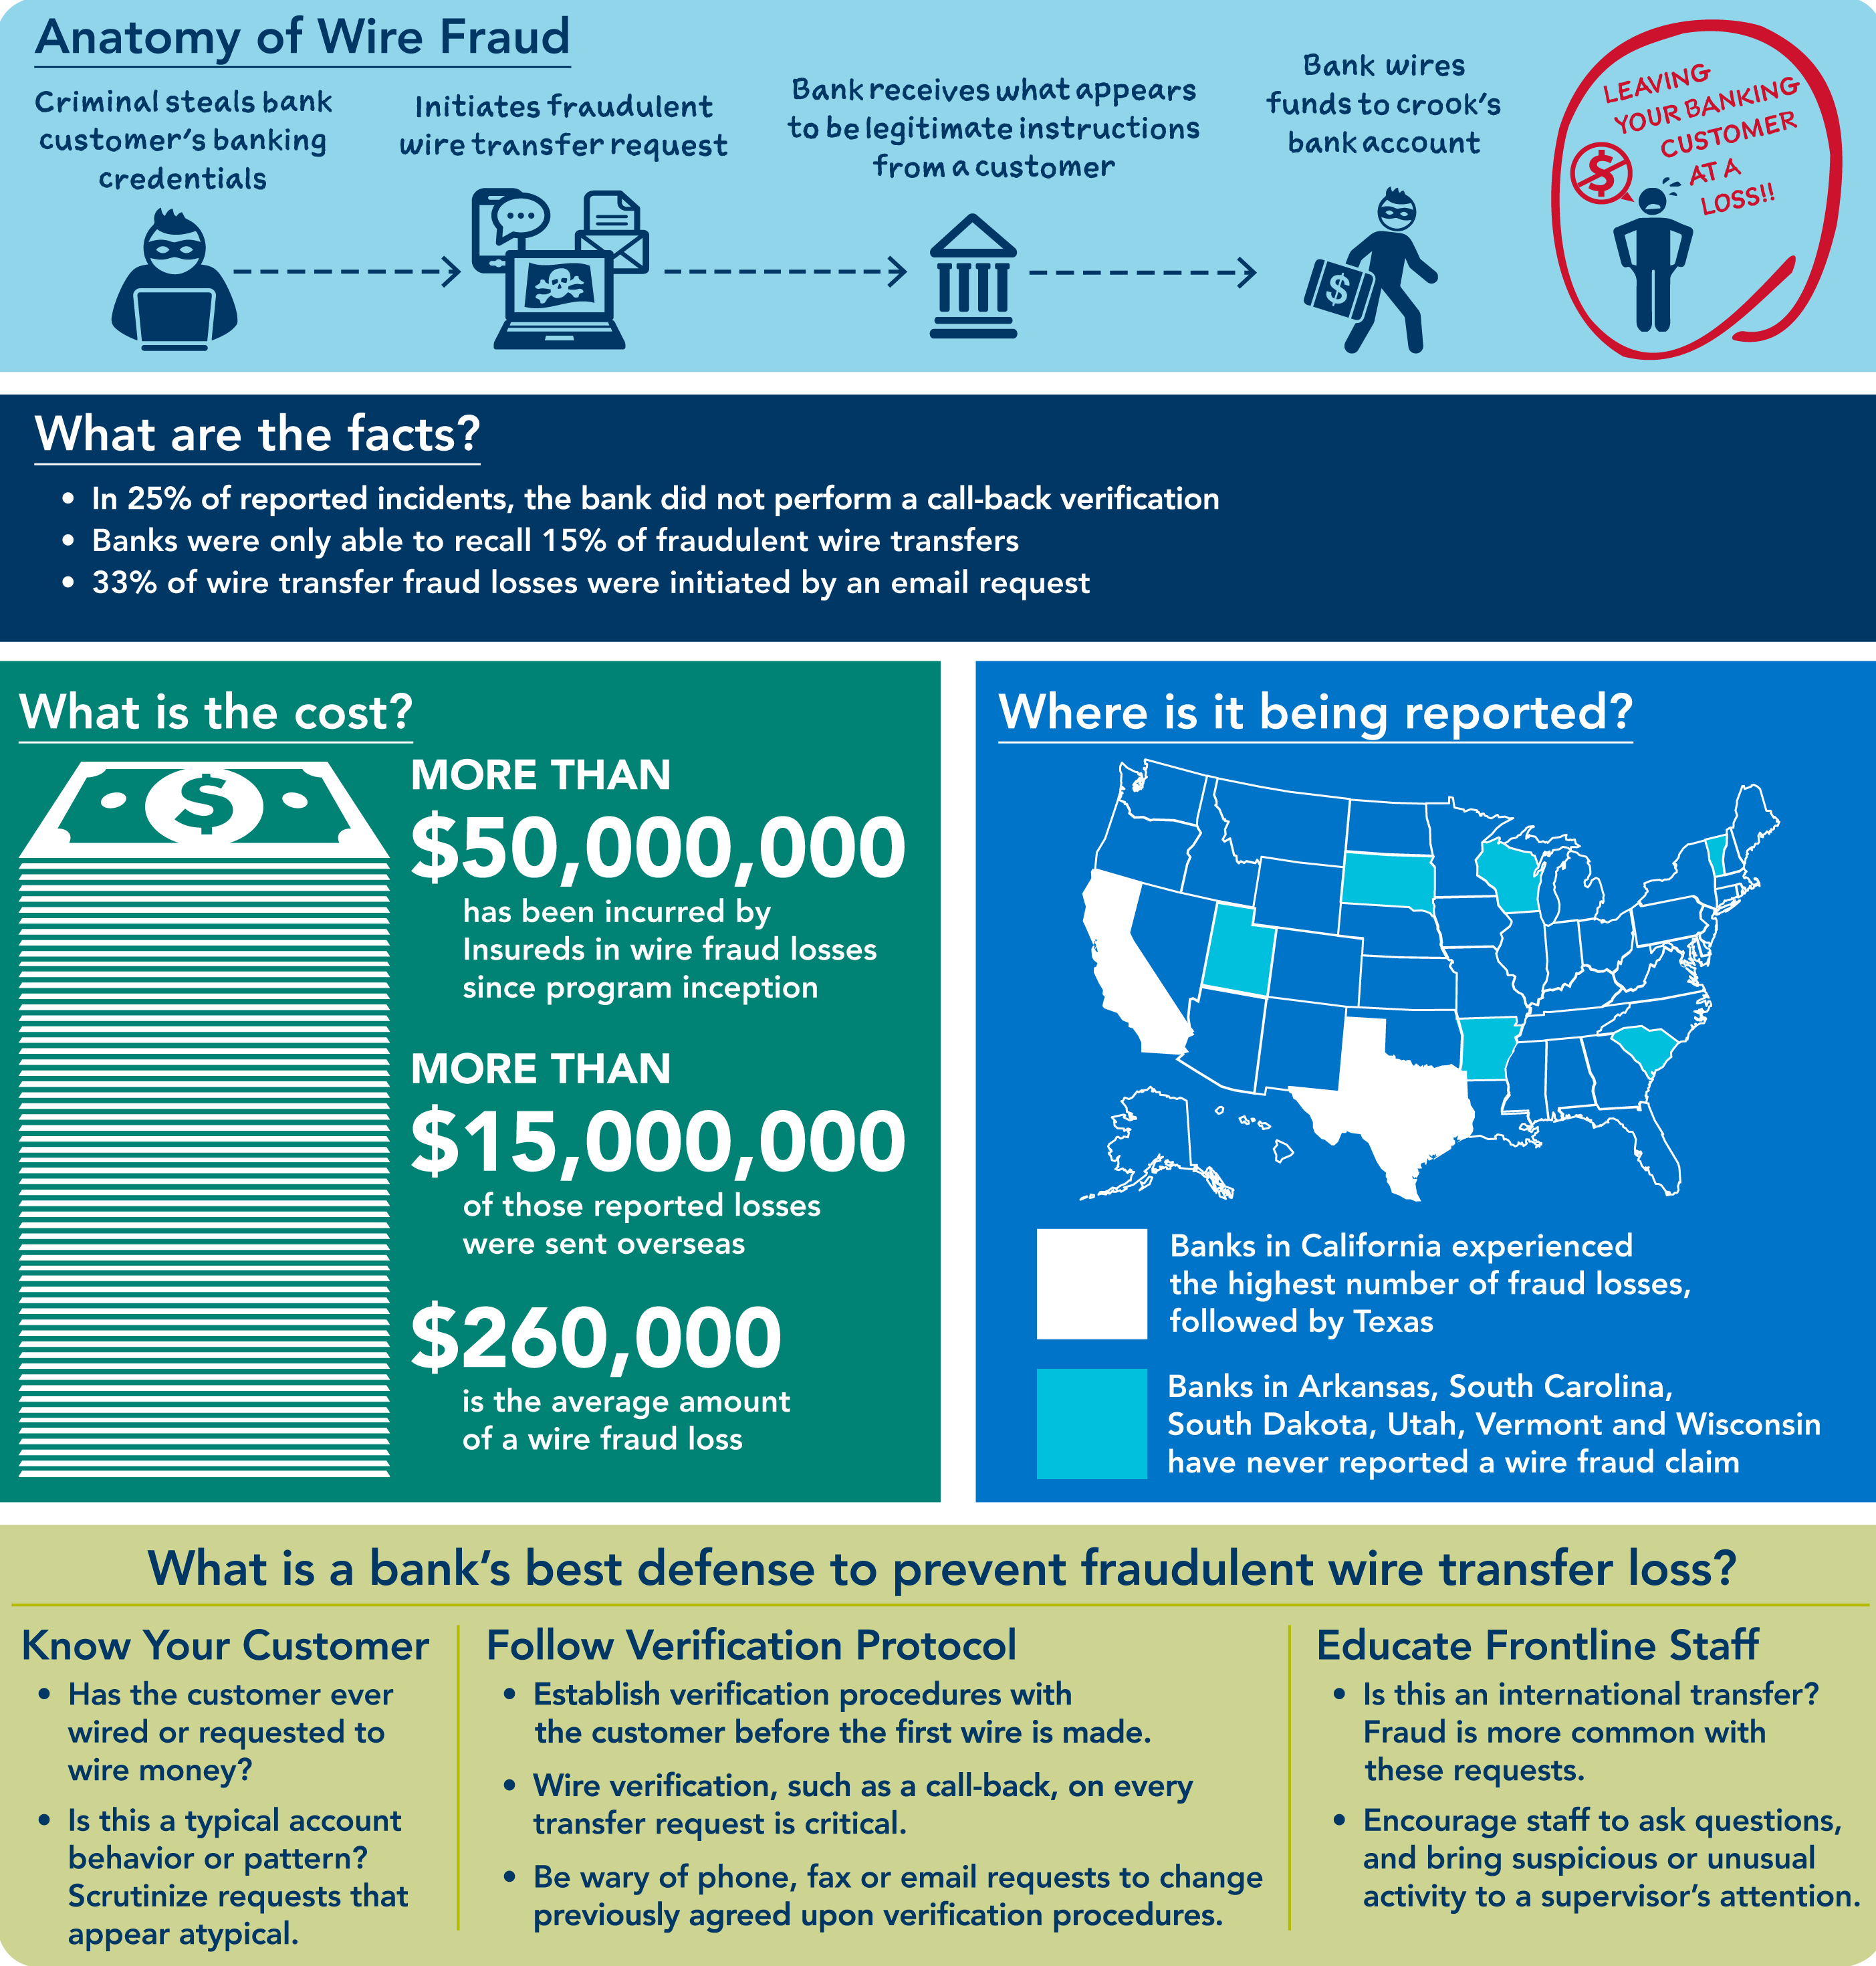 Image of Wire Fraud Statistics Infographic, including Anatomy of a Wire Fraud, Facts, Detrimental Costs, U.S. map of where being reported and what is a bank's best defense plan.